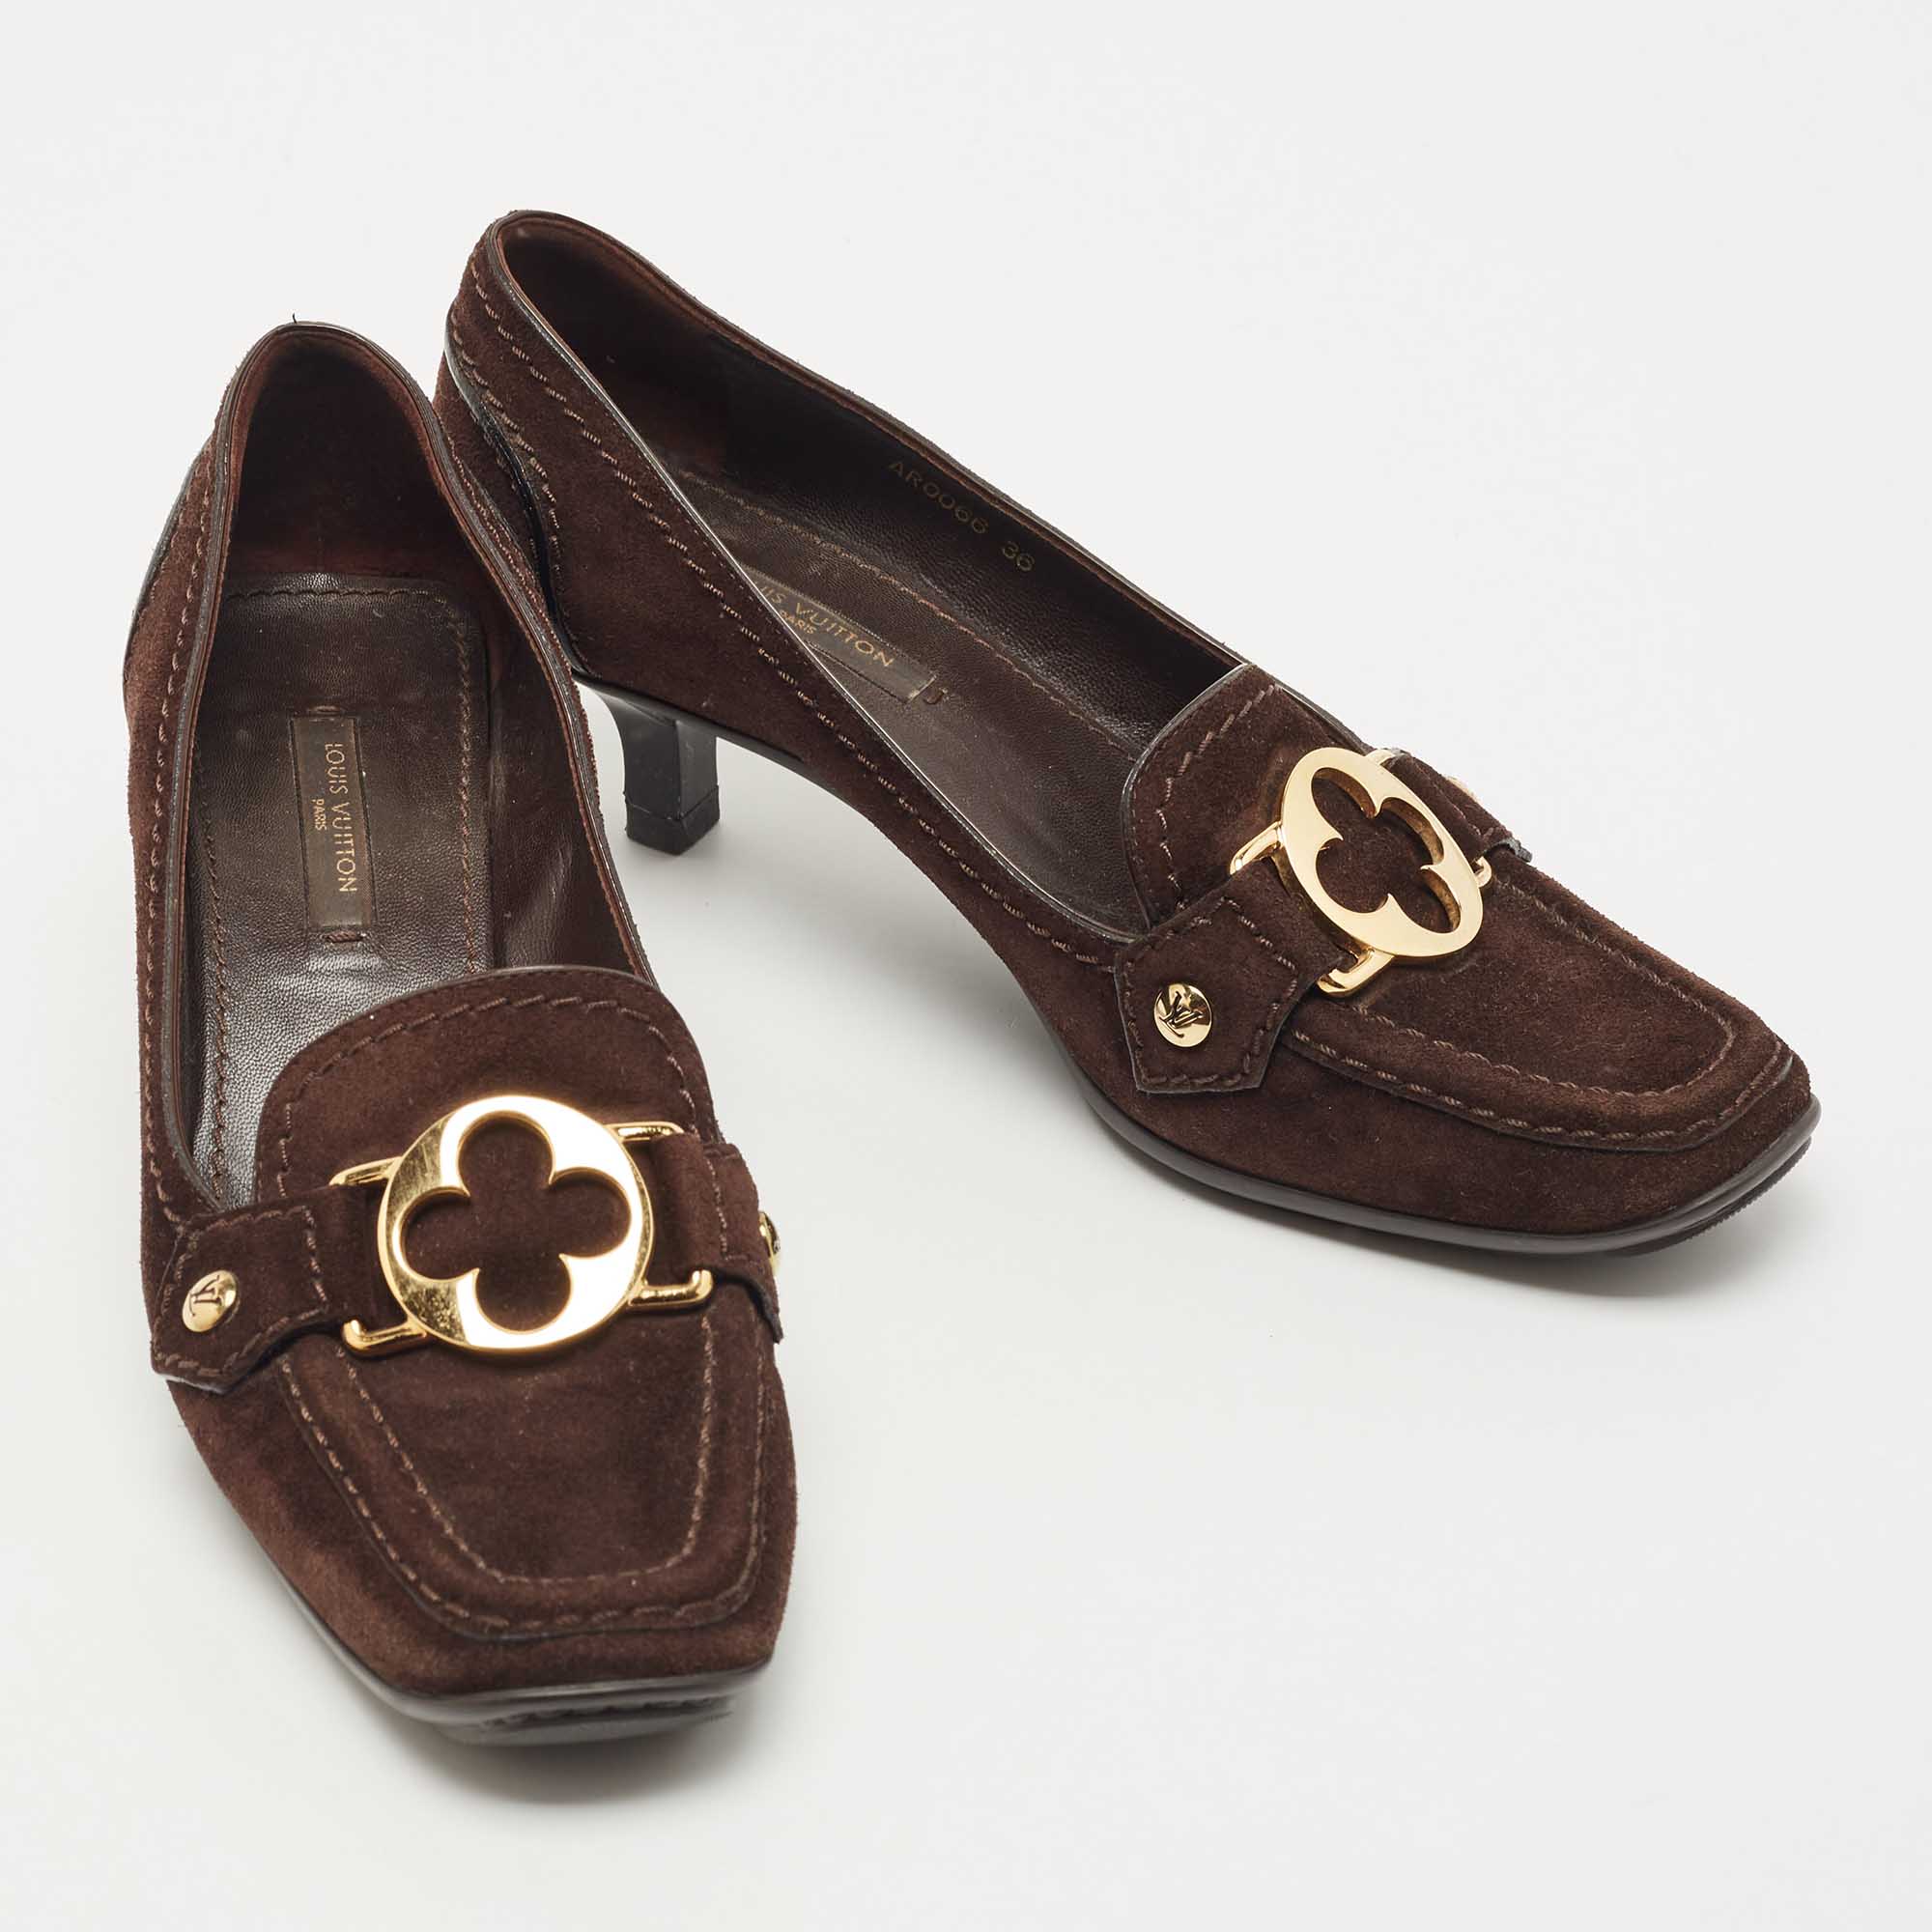 Louis Vuitton Brown Suede Leather Loafer Pumps Size 36